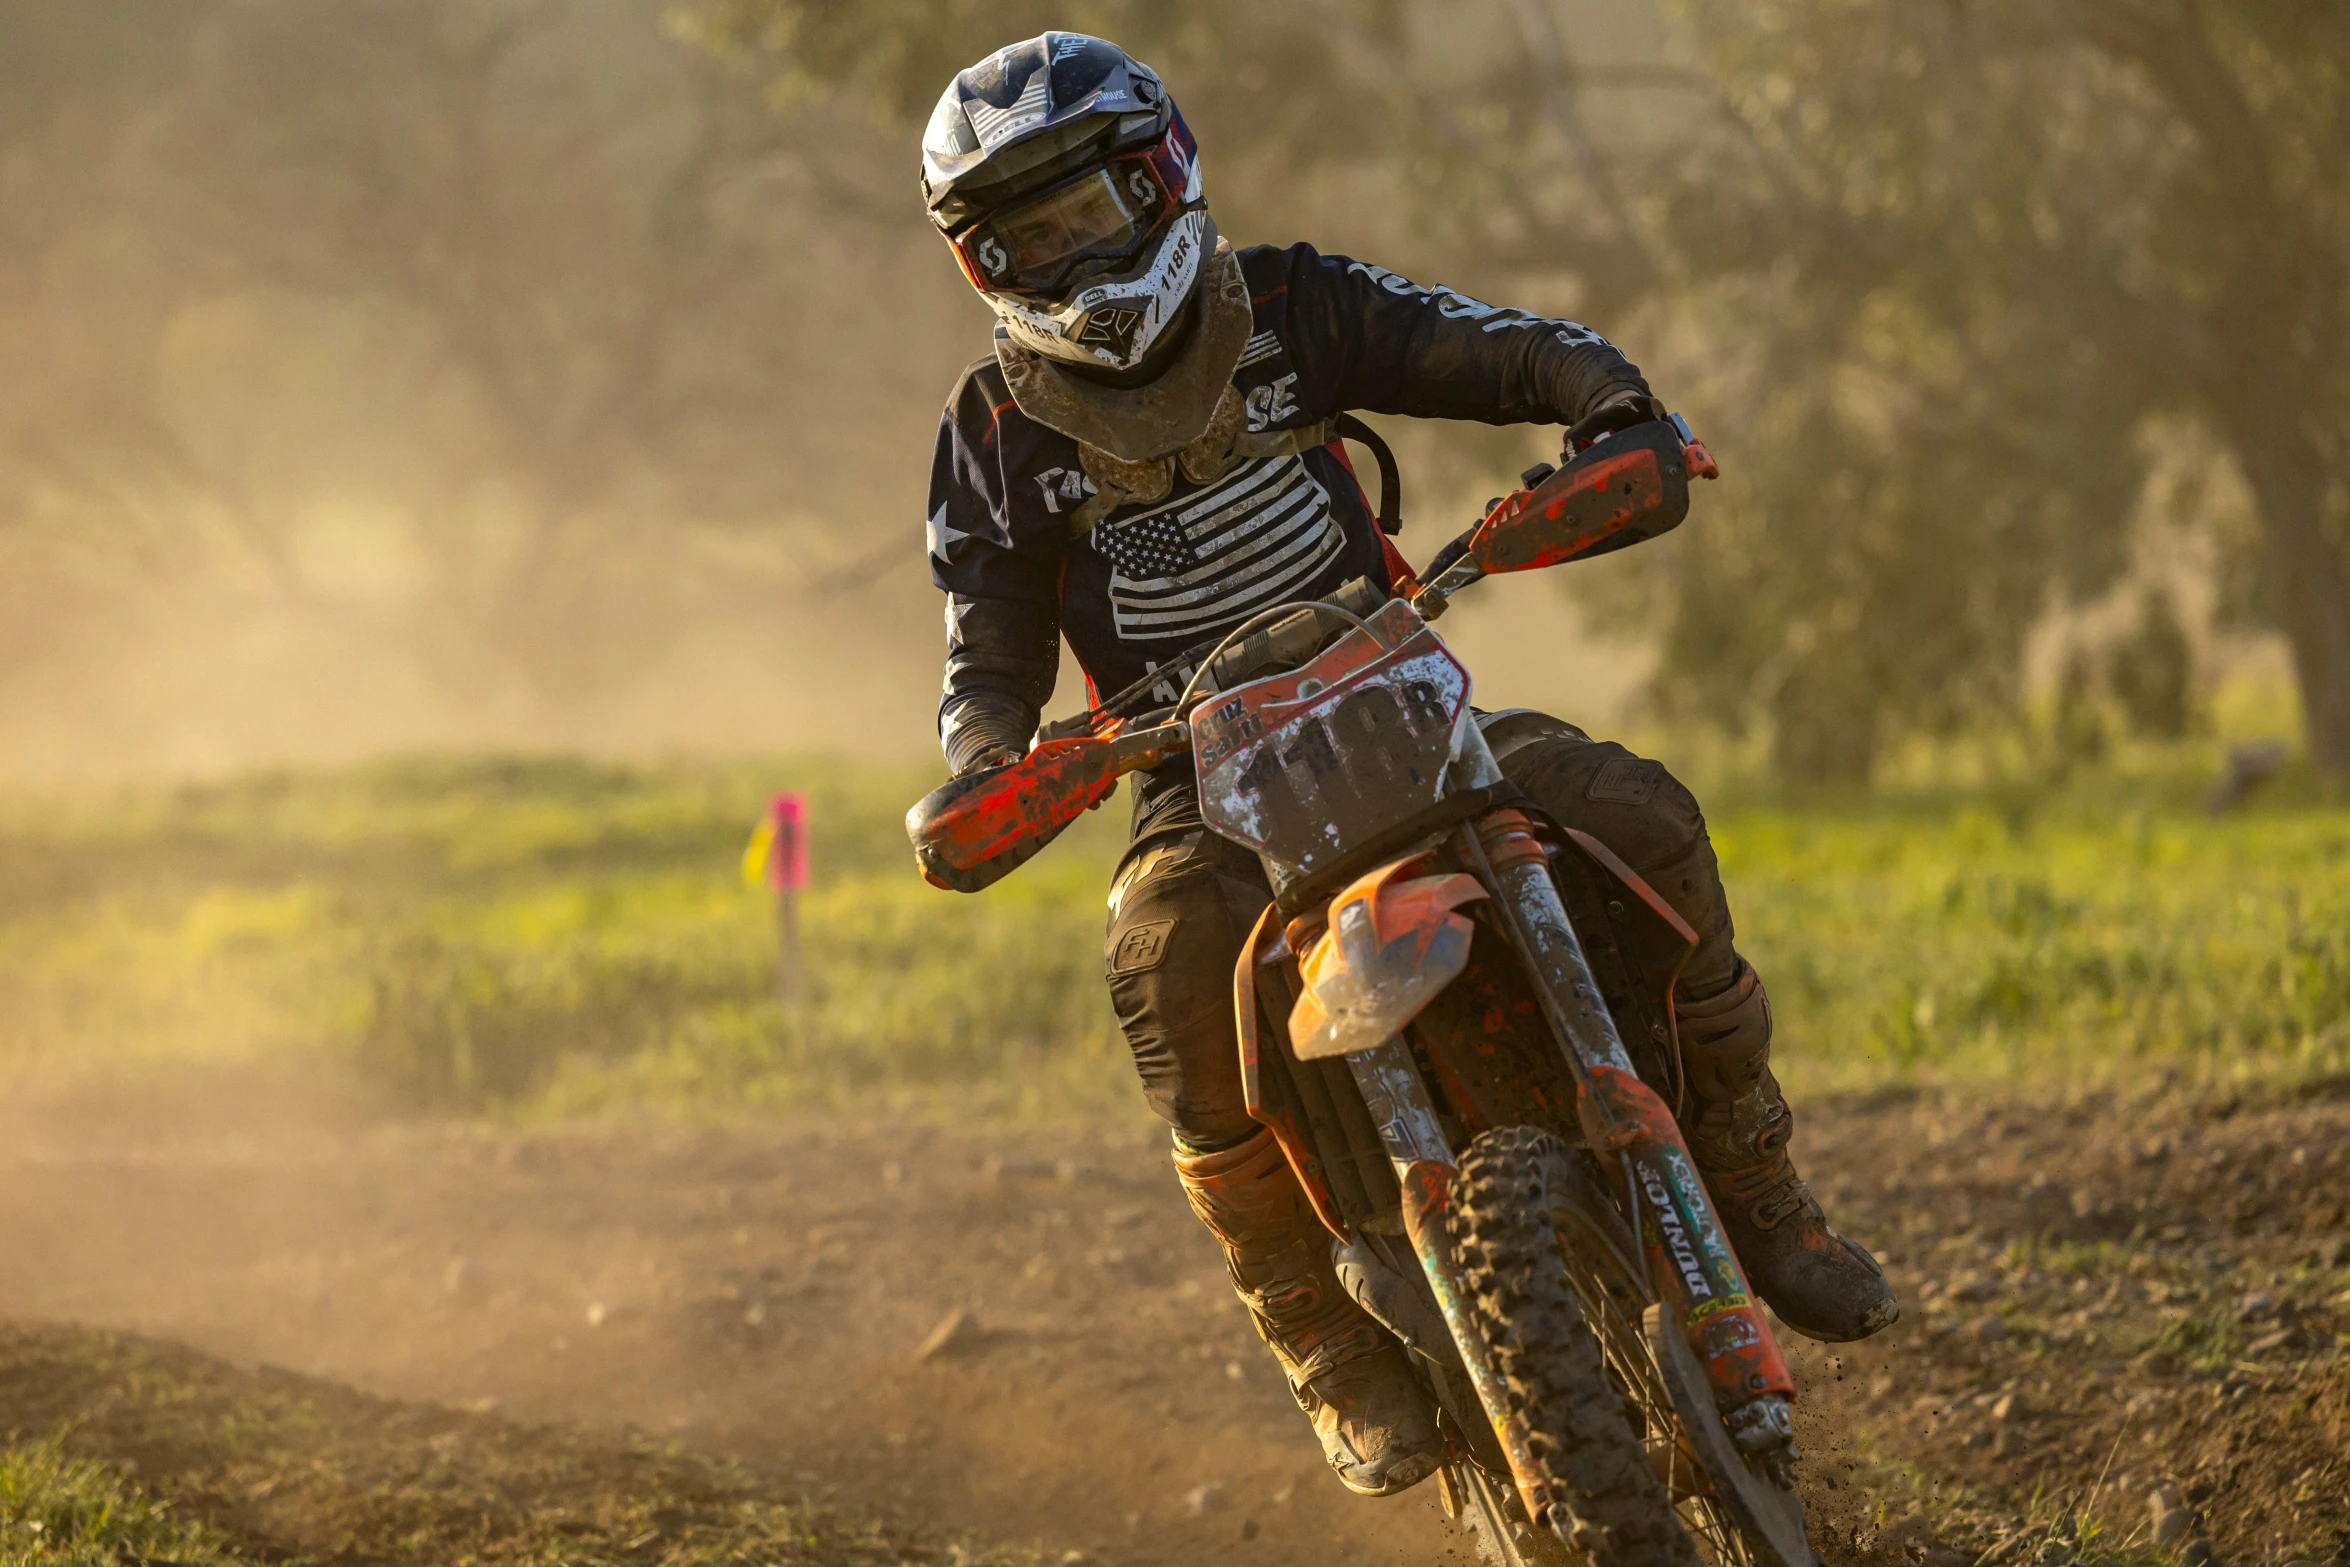 the motocross rider is going down the dirt track